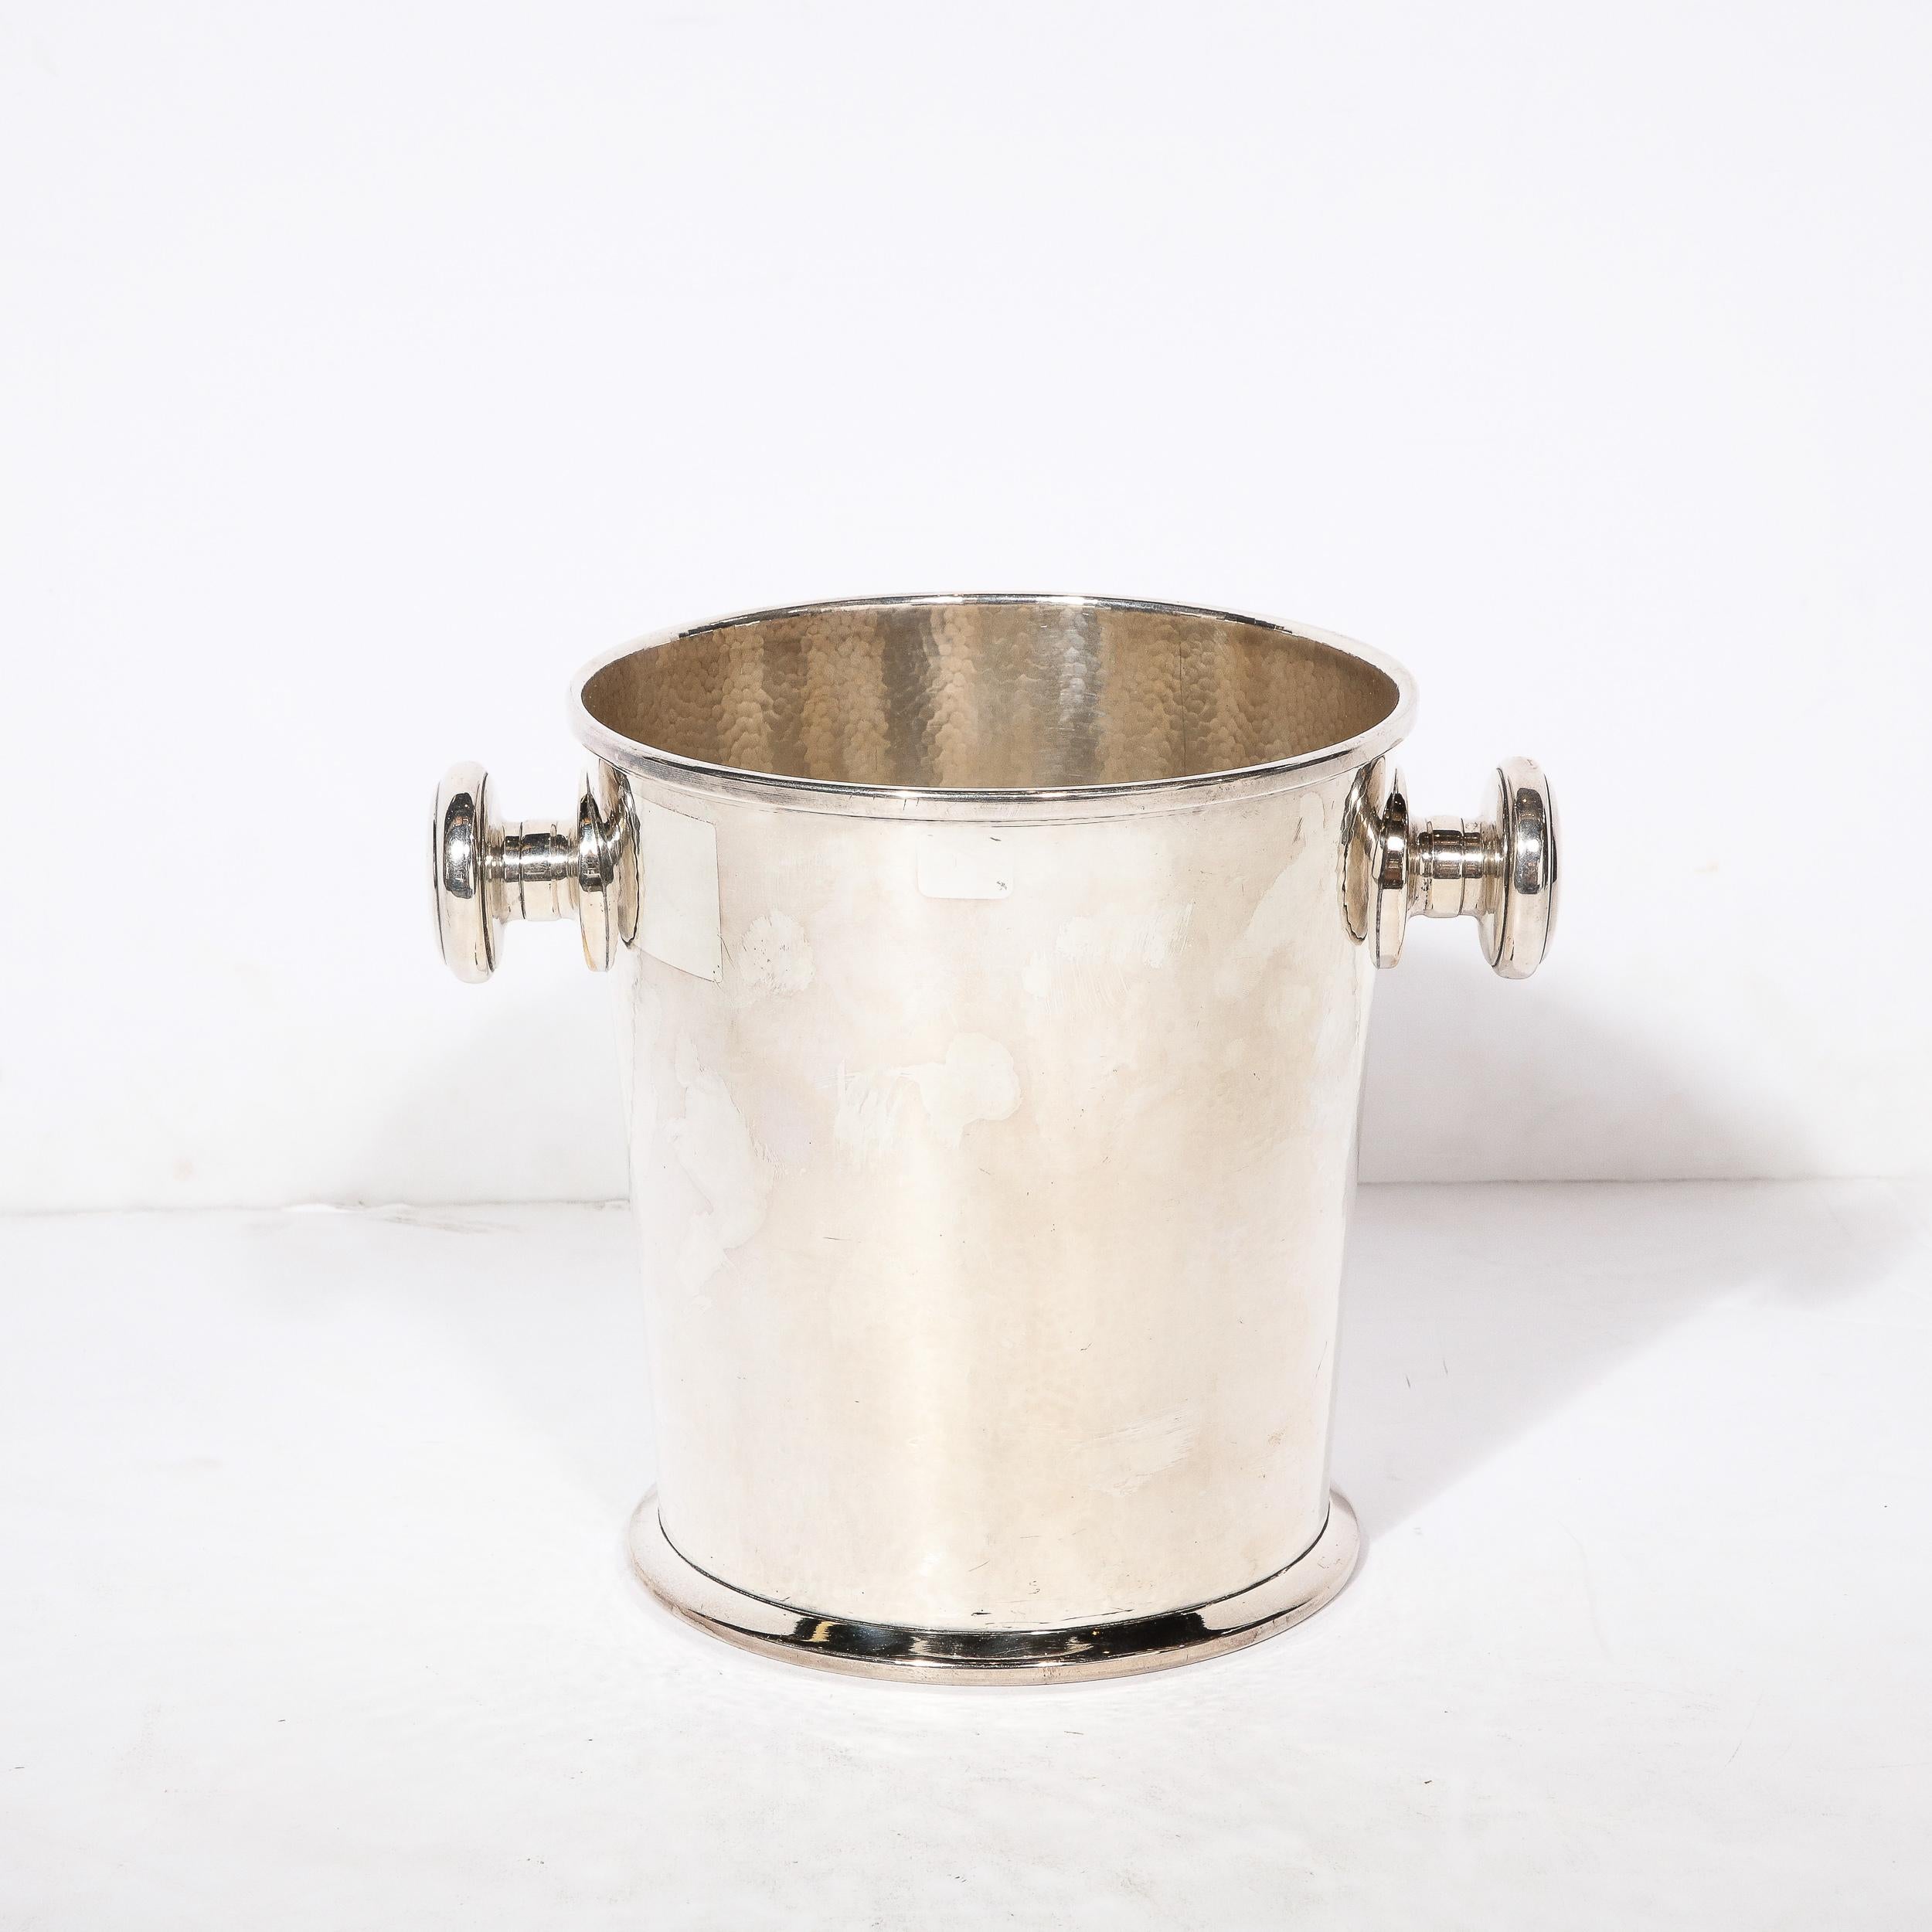 This beautifully bold Art Deco Silver Plate Ice Bucket with Rounded Handles and Hammered Textural Detailing originates from France, Circa 1930. The body has extremely precise hammered detailing creating a texture full of movement, evenly altering